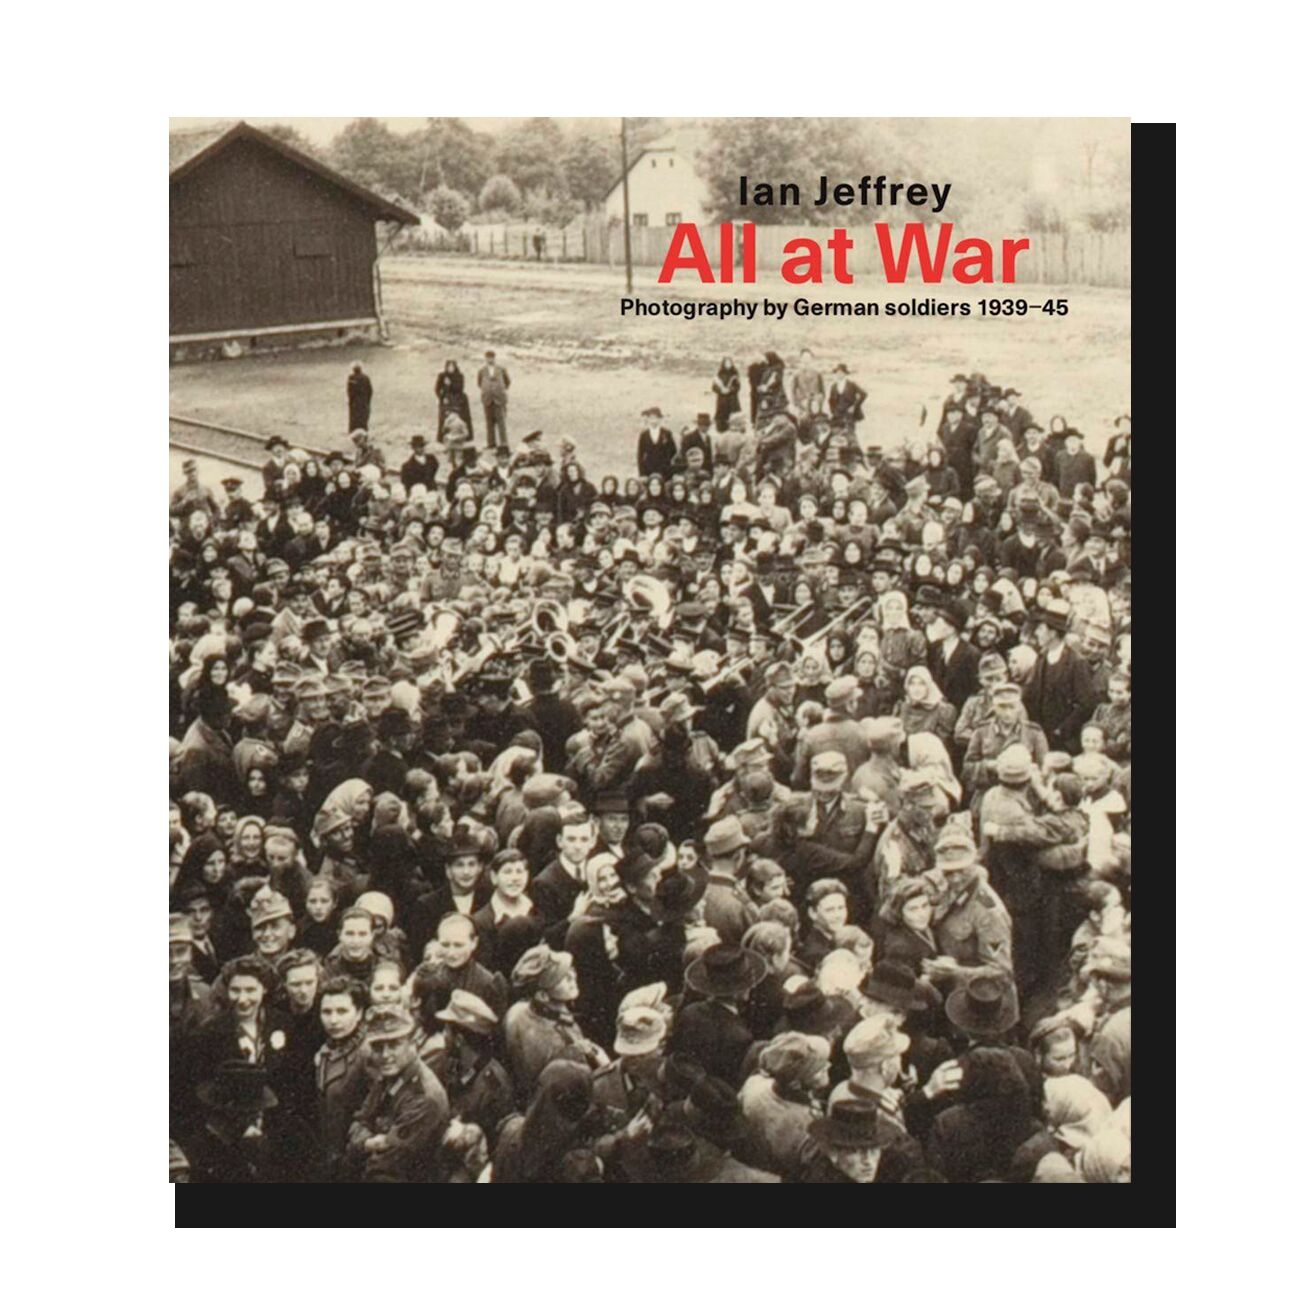 All At War: Photography by German soldiers 1939-45